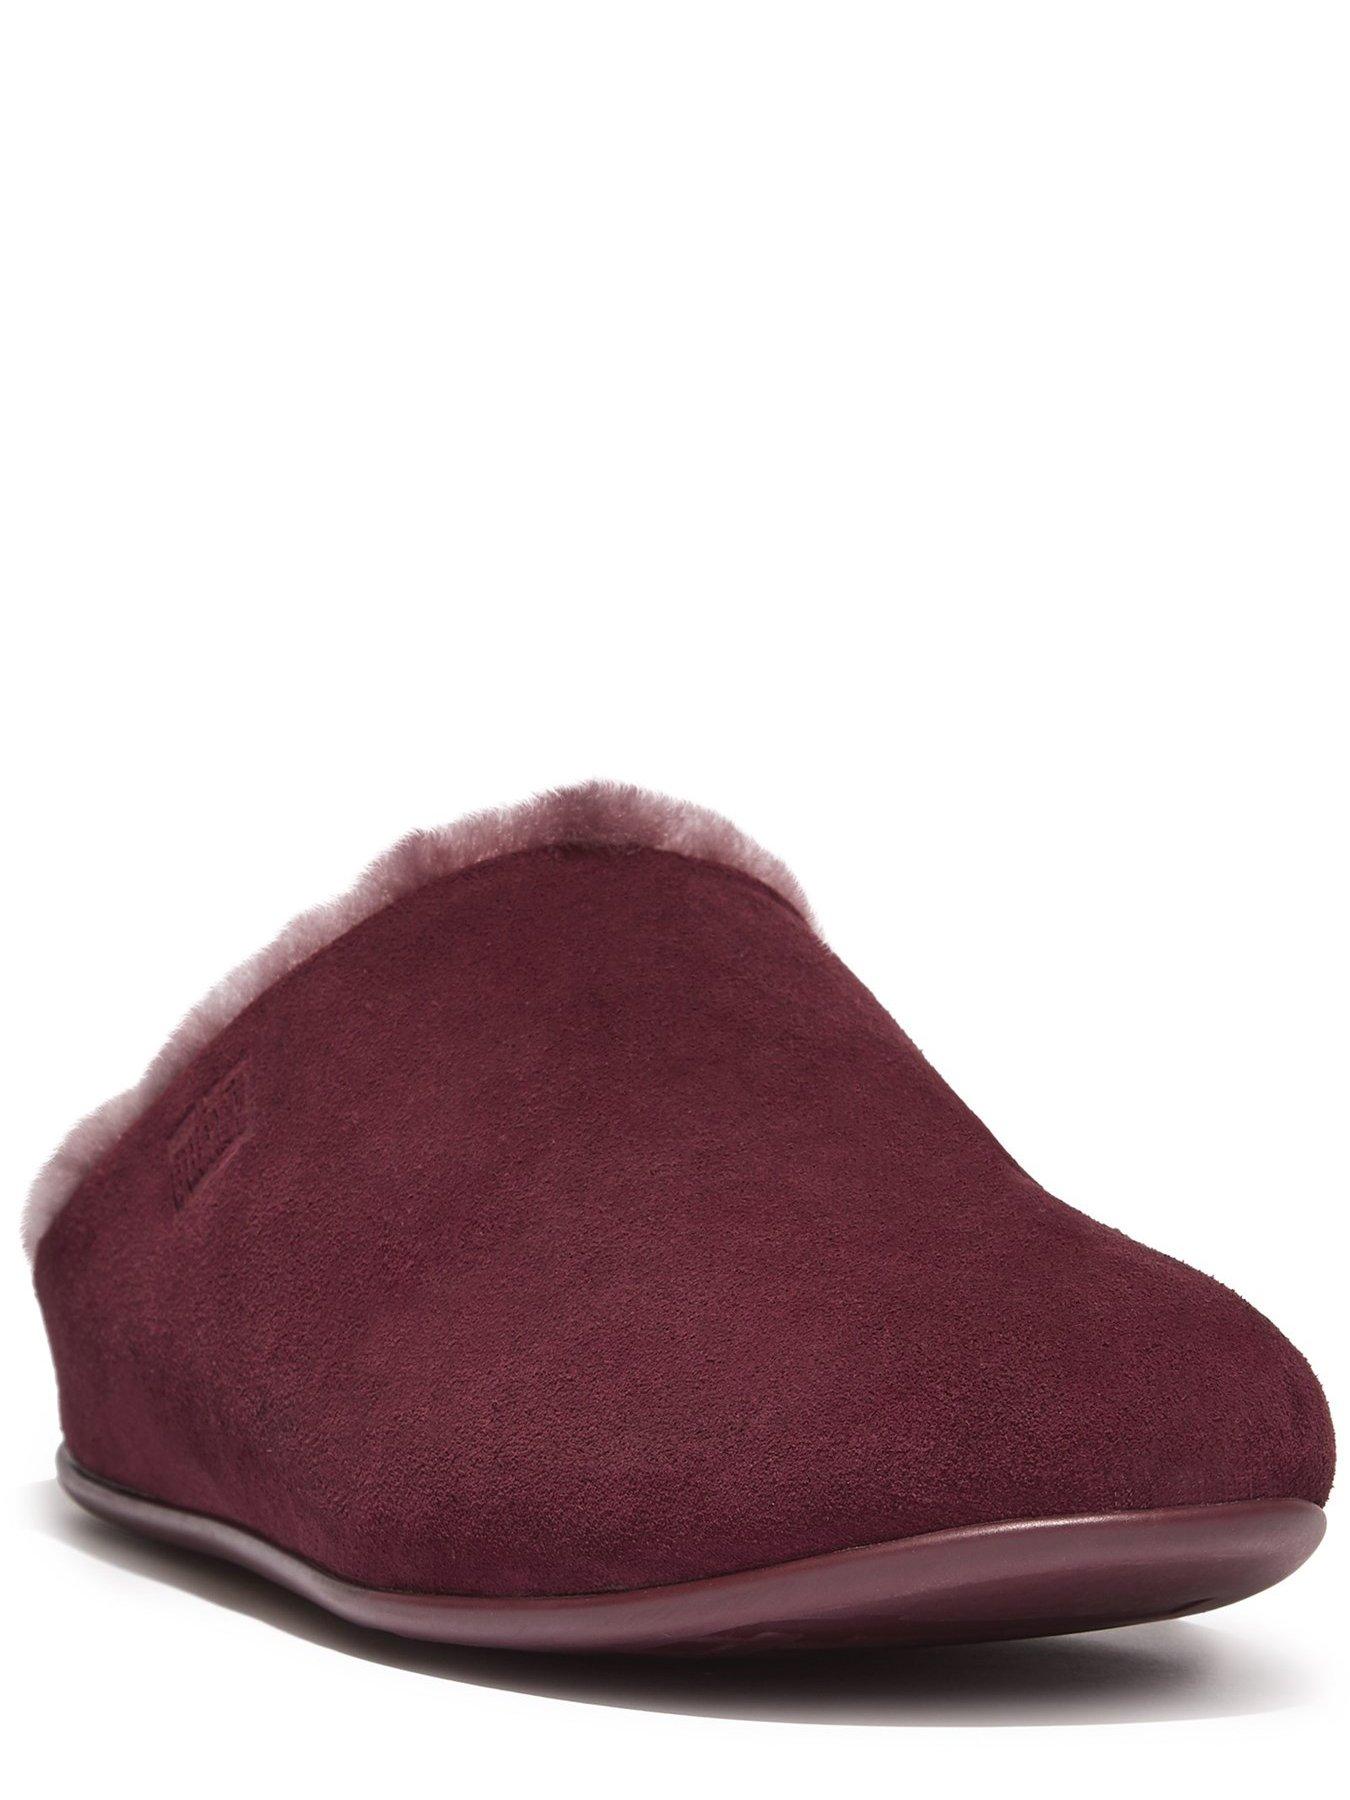 FitFlop Chrissie Shearling Slippers - Plum | very.co.uk